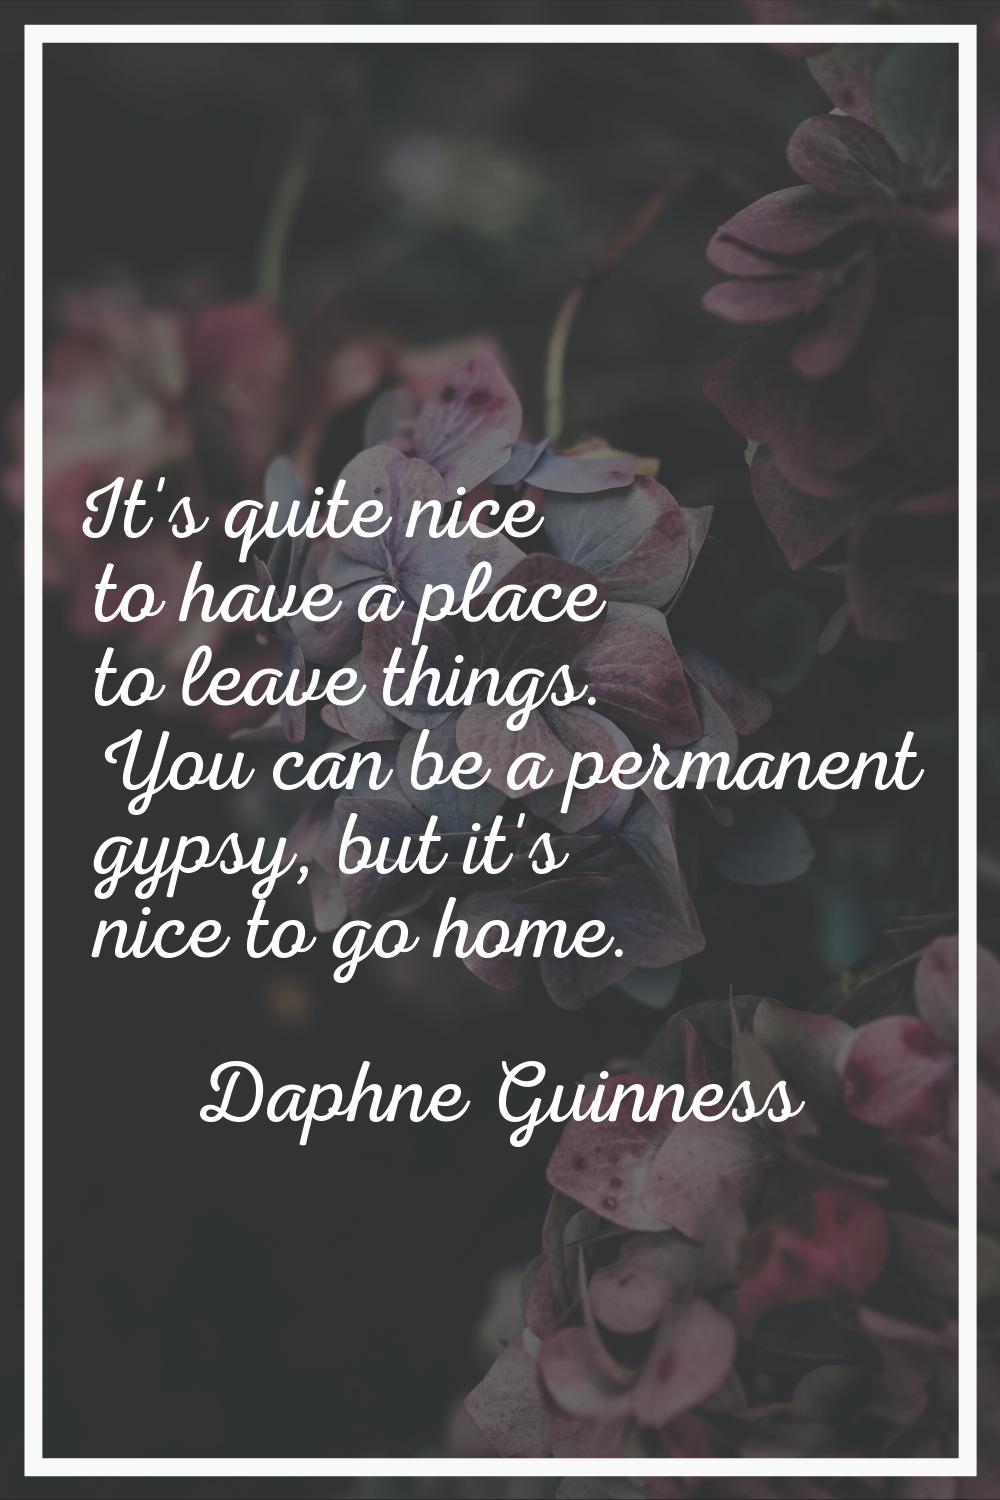 It's quite nice to have a place to leave things. You can be a permanent gypsy, but it's nice to go 